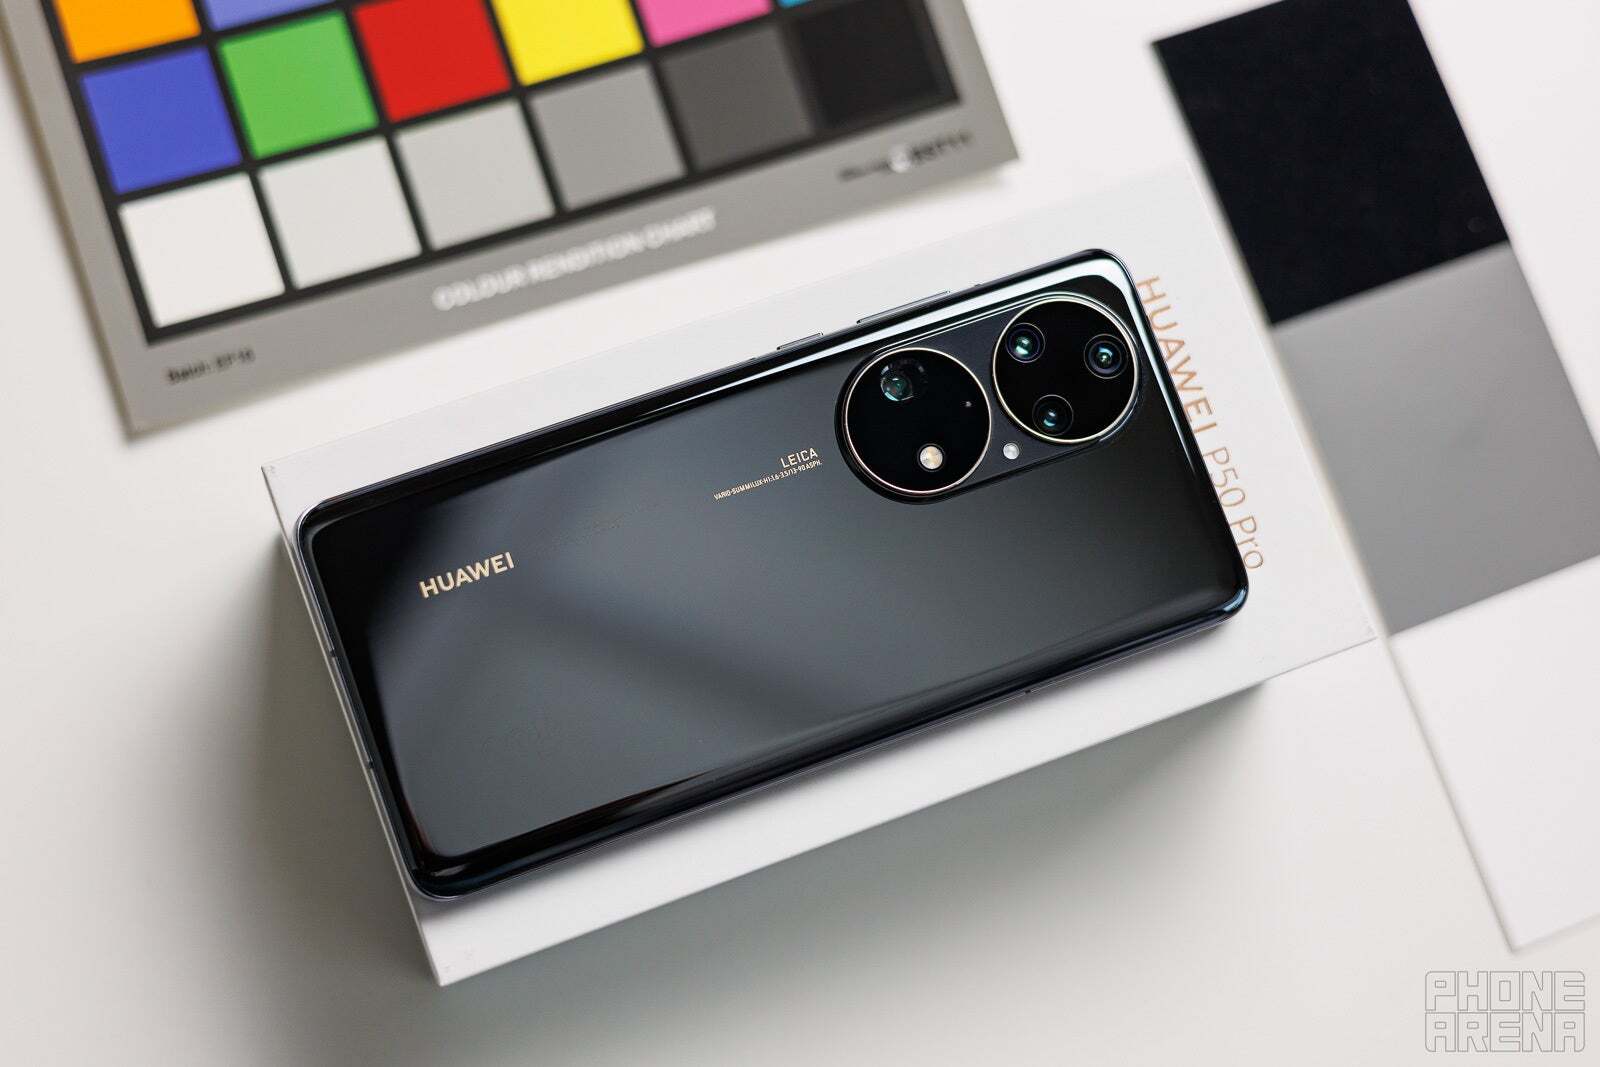 The Huawei P50 Pro - OnePlus, Oppo partnership with Hasselblad is rumored to be near an end. What does this mean for your photos?